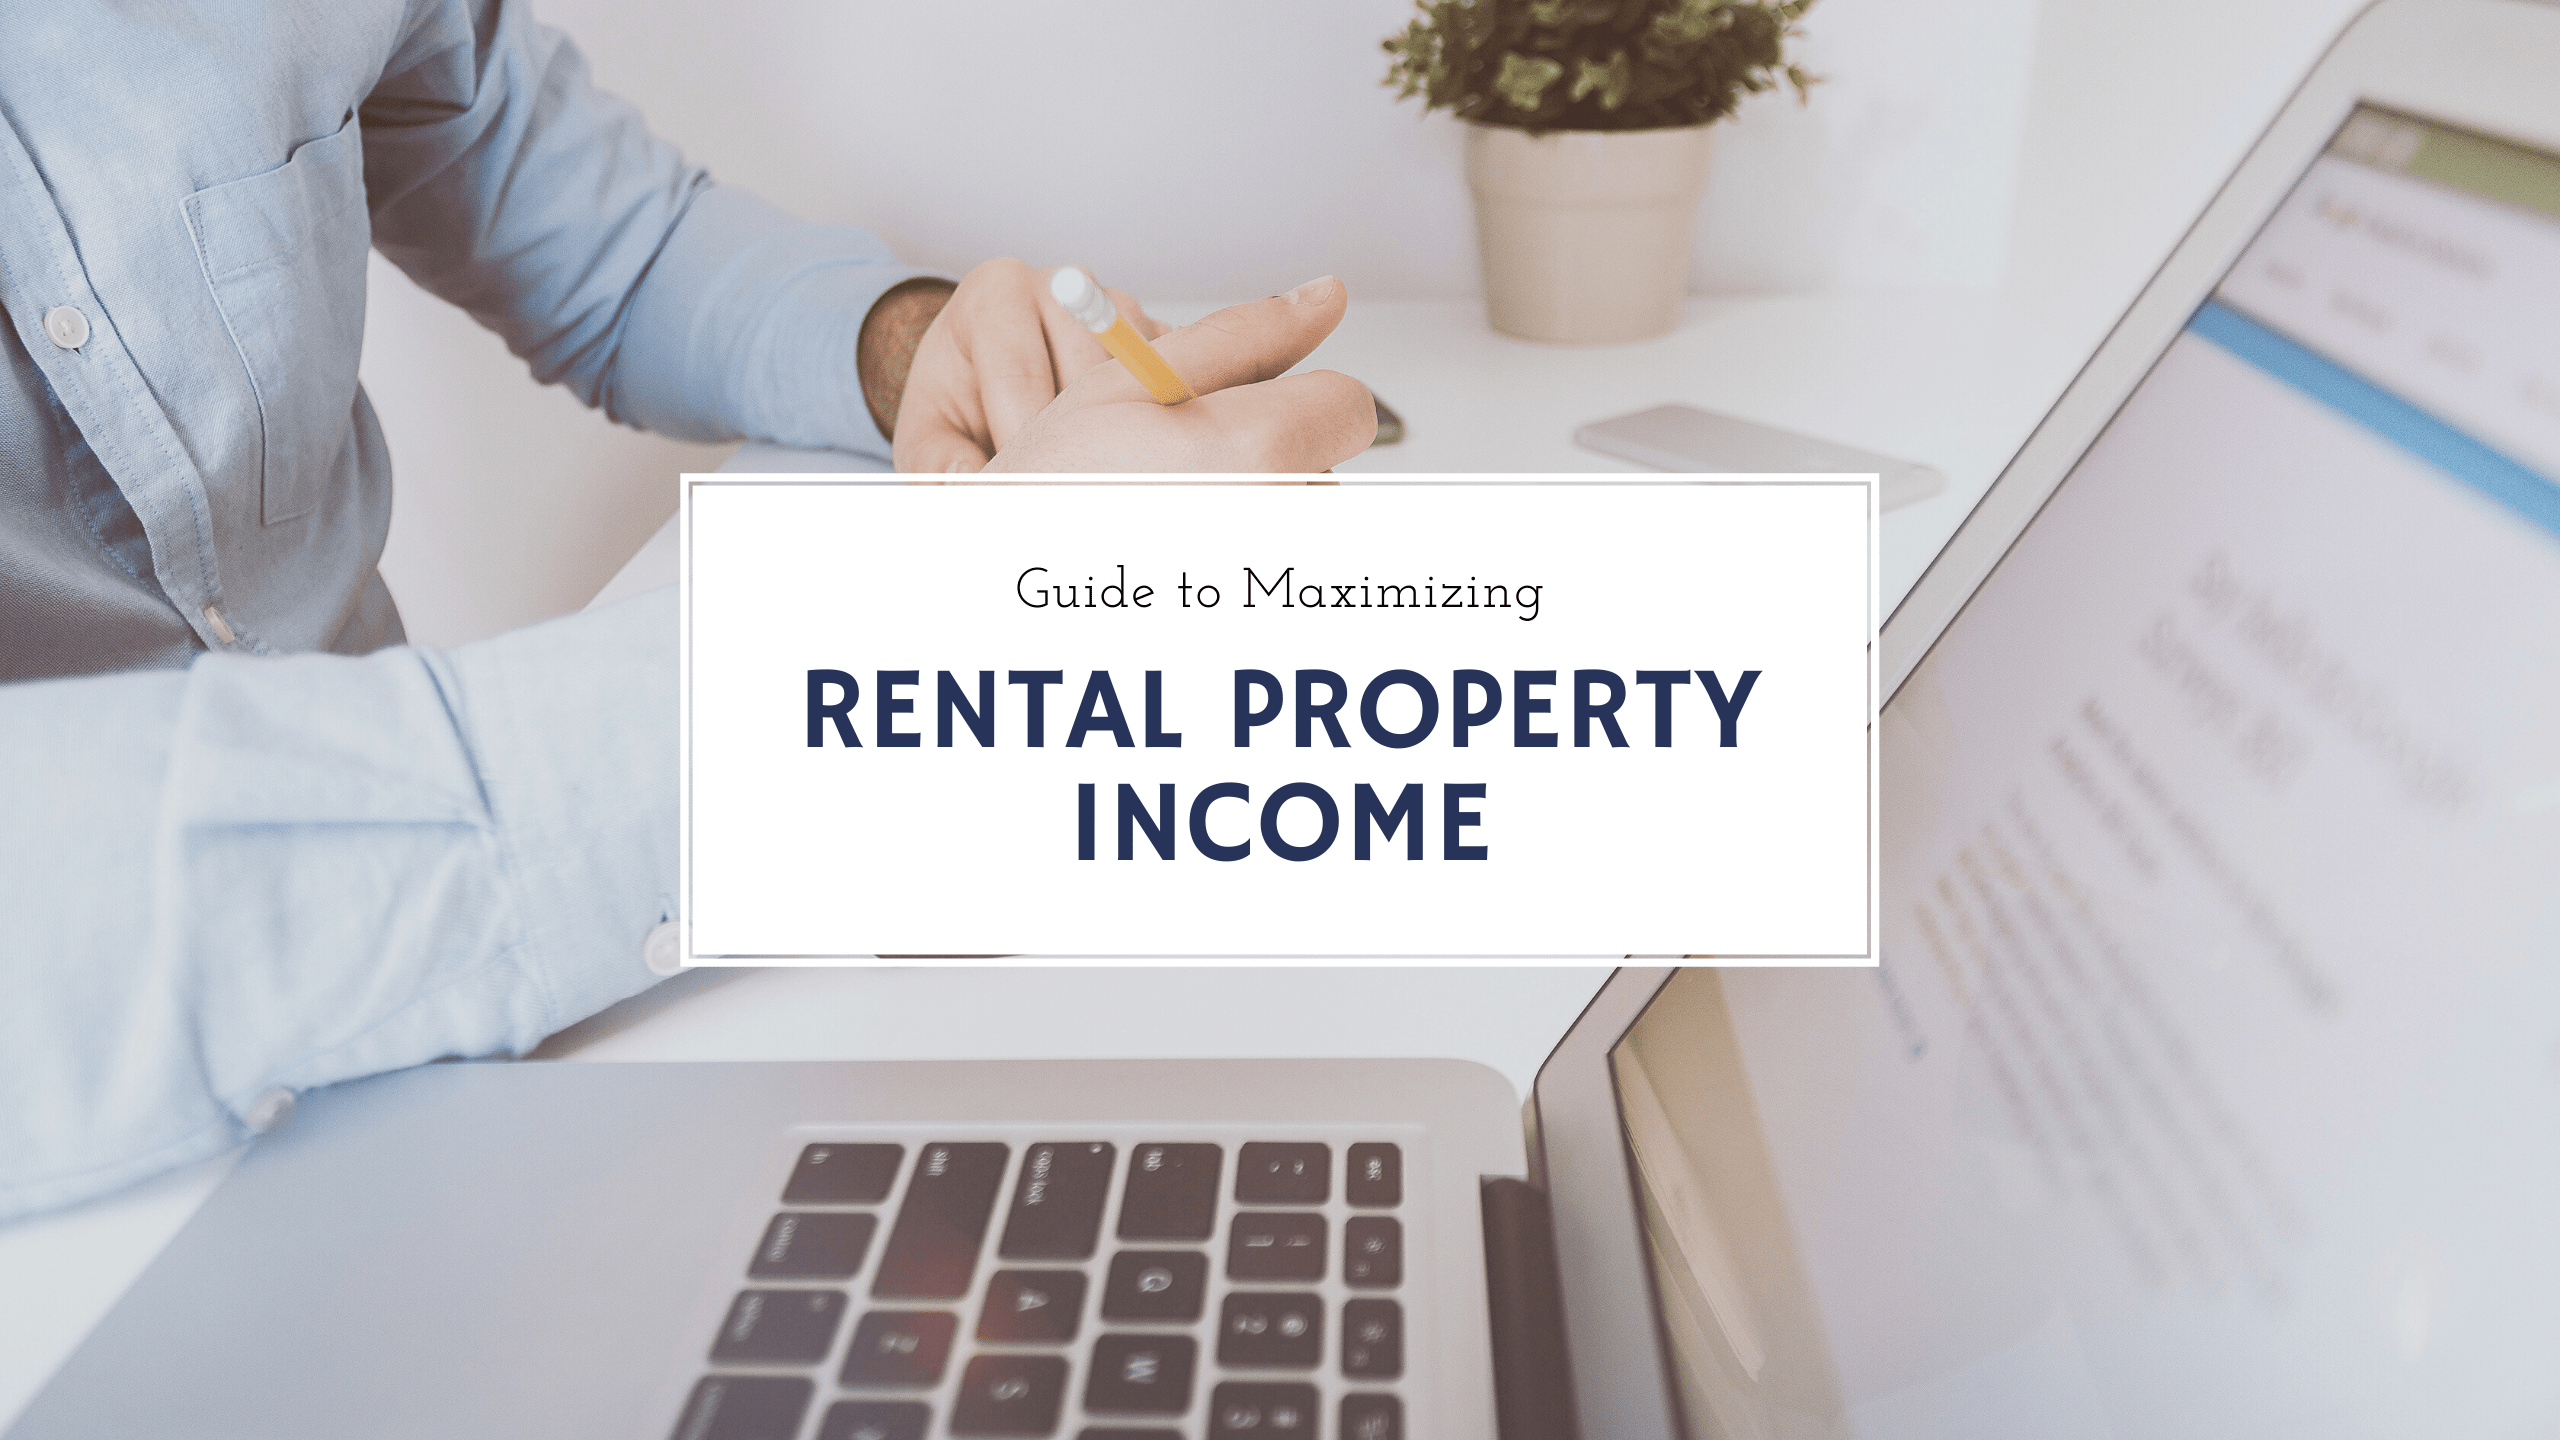 San Jose Real Estate Investors' Guide to Maximizing Rental Property Income